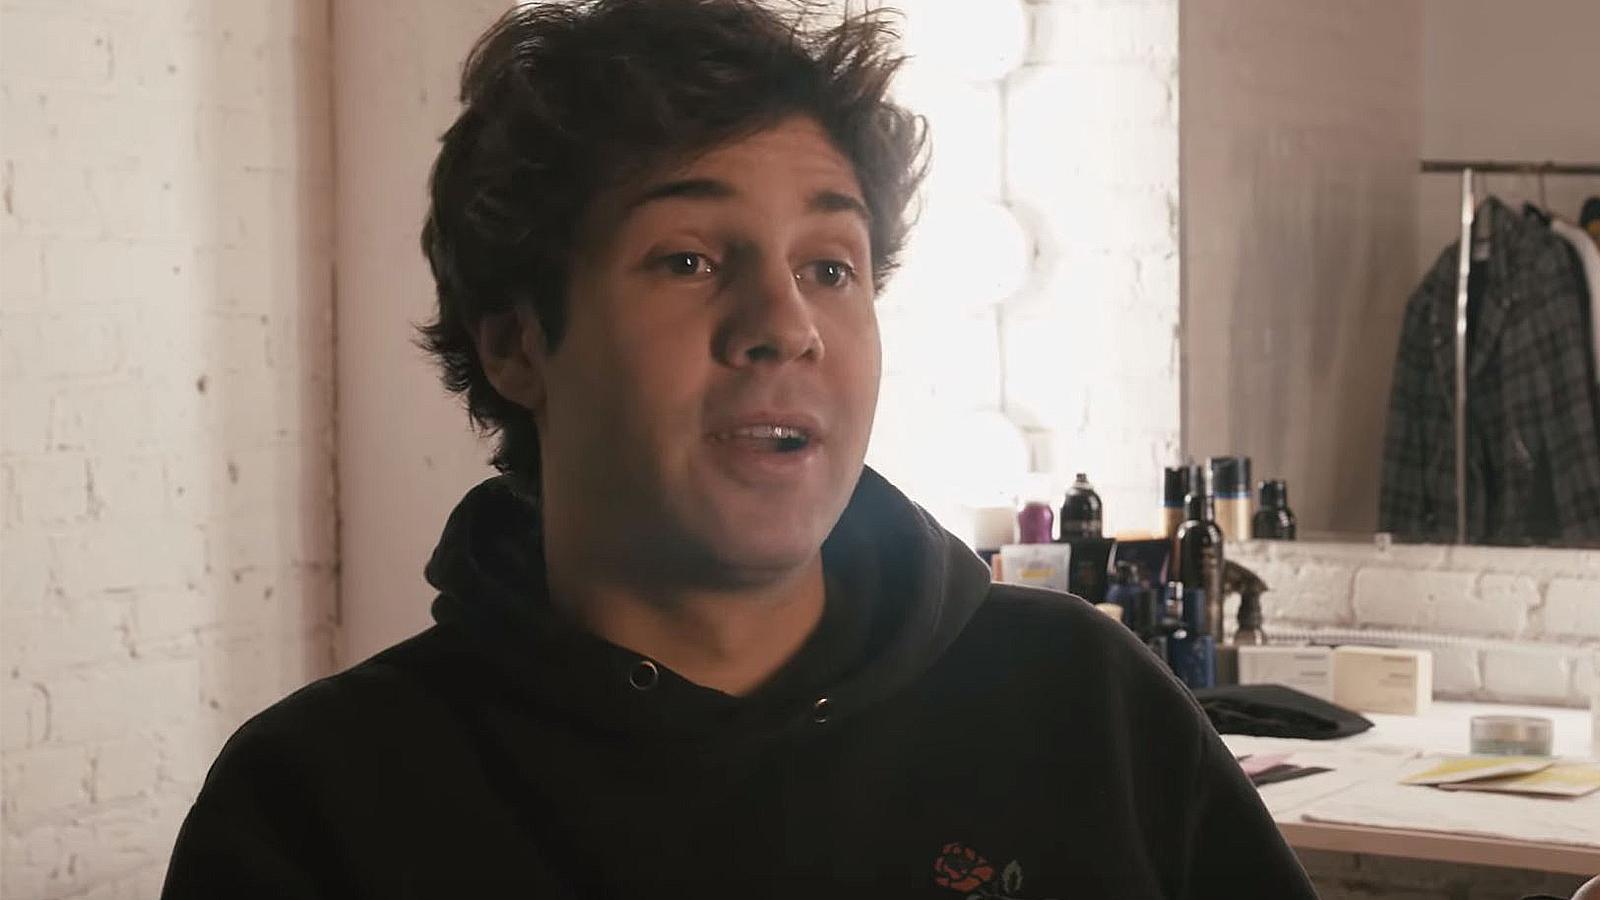 David Dobrik addresses rumors about his sexuality